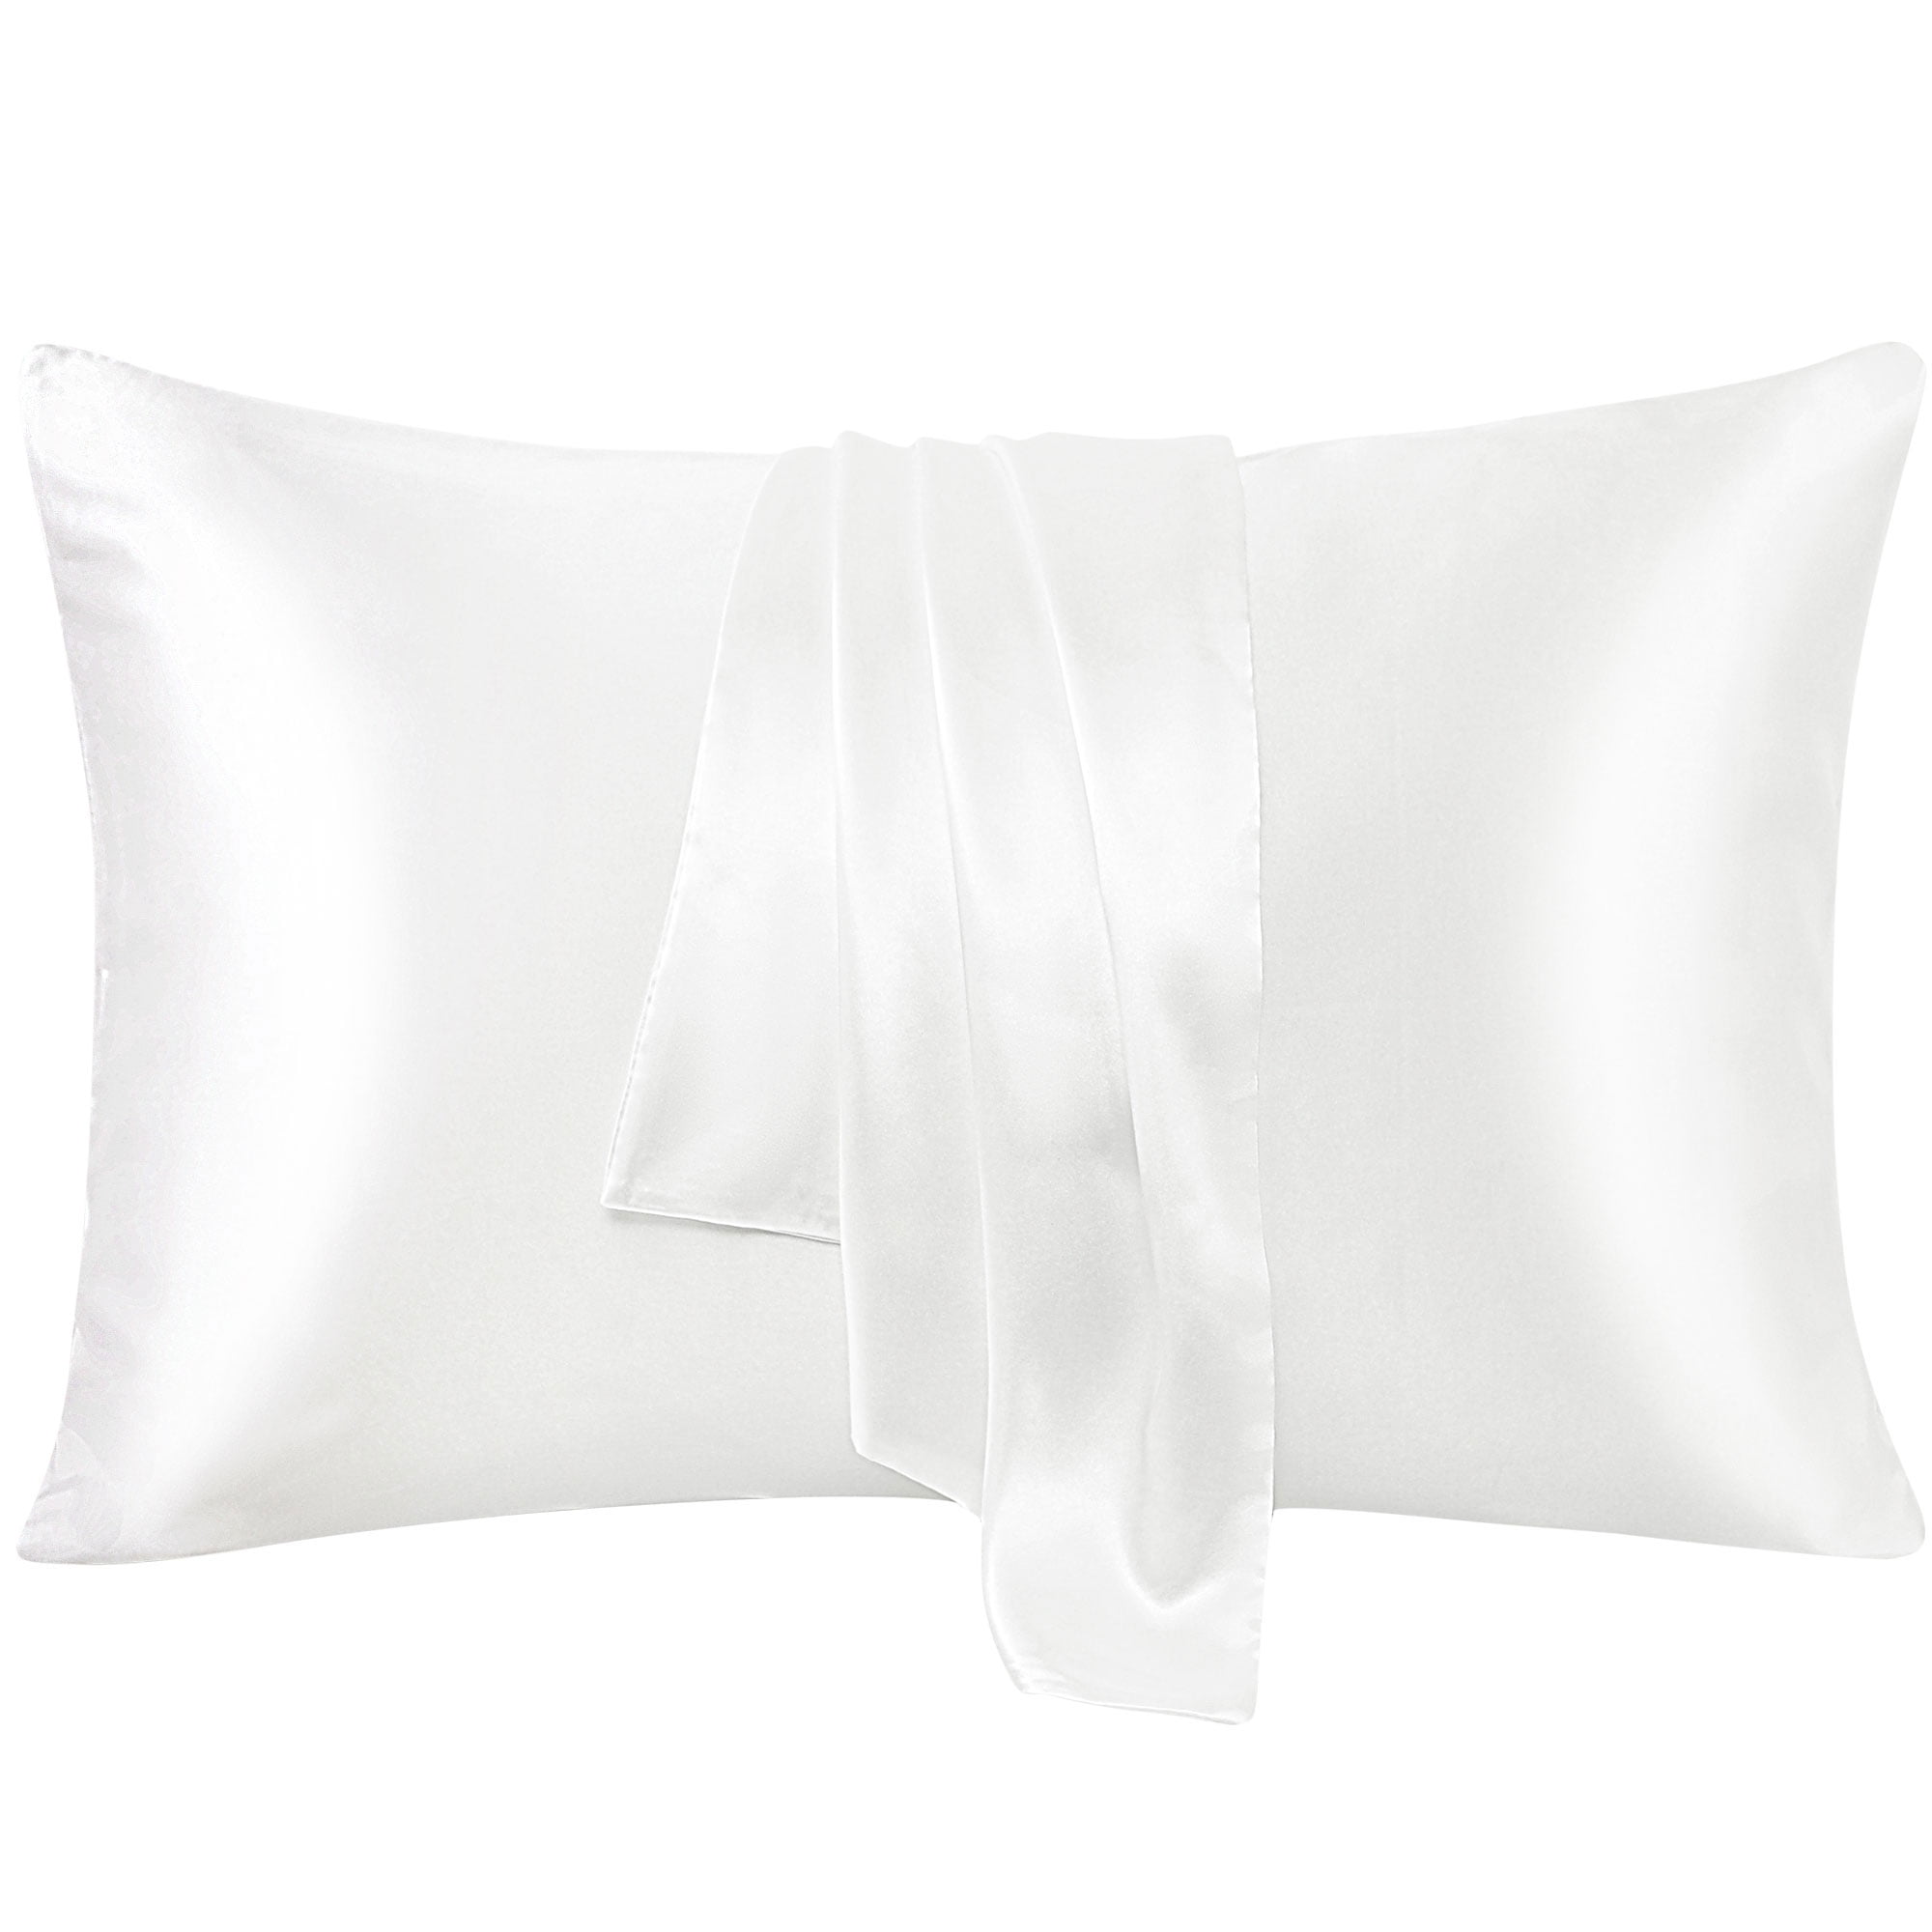 Details about   Cotton Dark Grey Pillow Case Made of 800 Thread Count Set of 2 Bed Pillowcases 